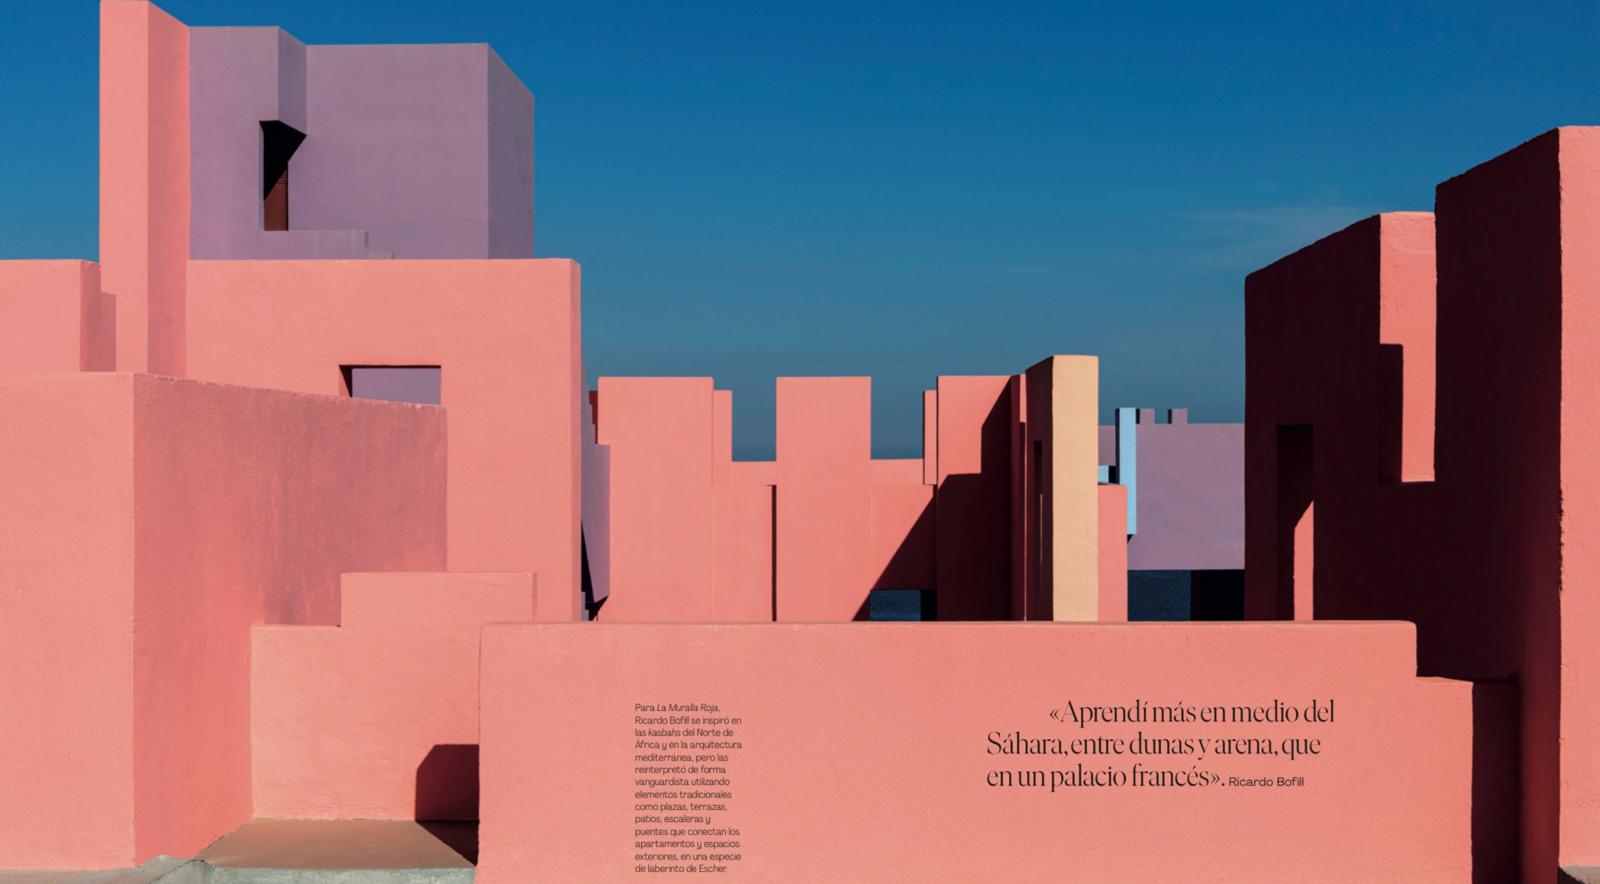 Penthouse in Muralla Roja, the best known building of Spain's famous architect RICARDO BOFILL, overlooking the sea, the Peñon de Ifach.